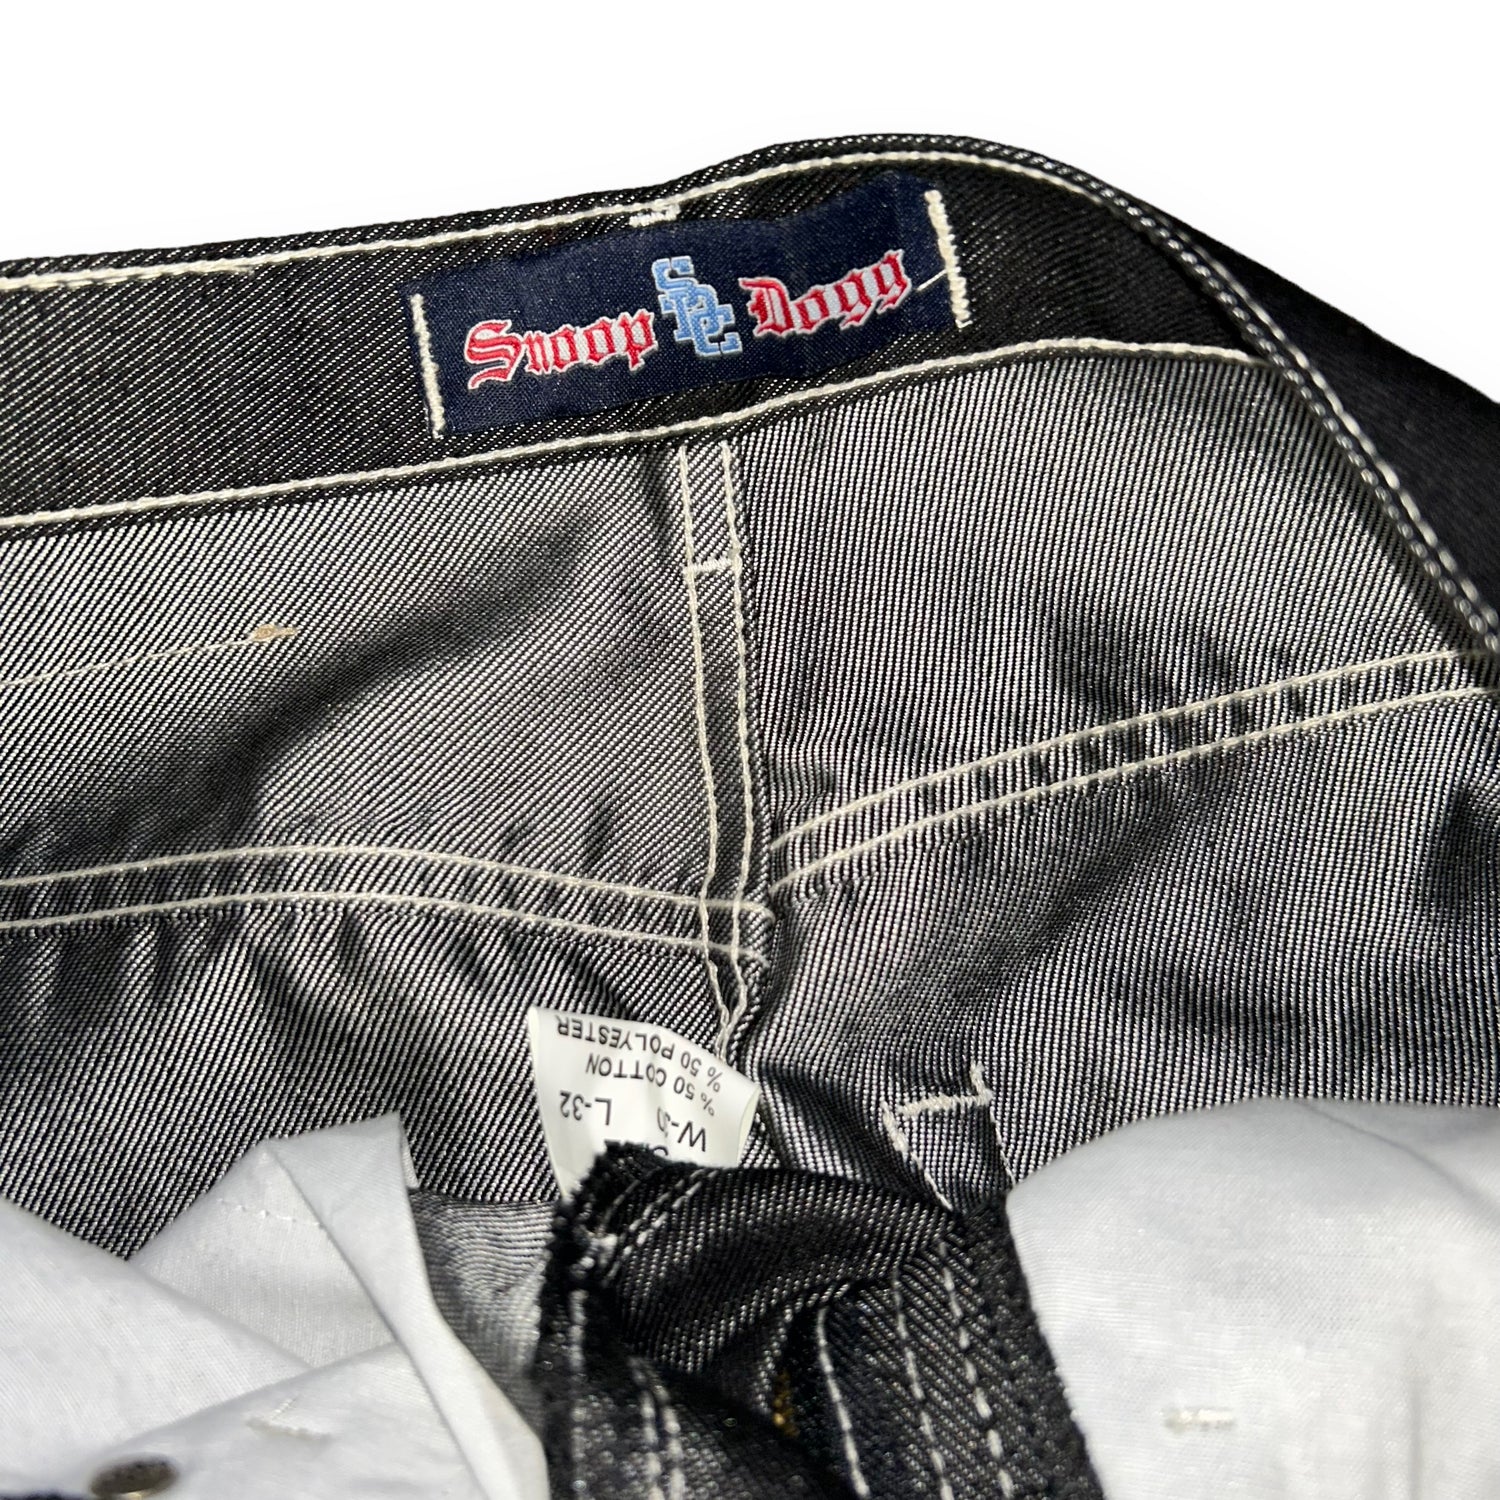 Baggy Jeans Snoop Dogg Clothing Shiny Vintage  (30 USA  S)